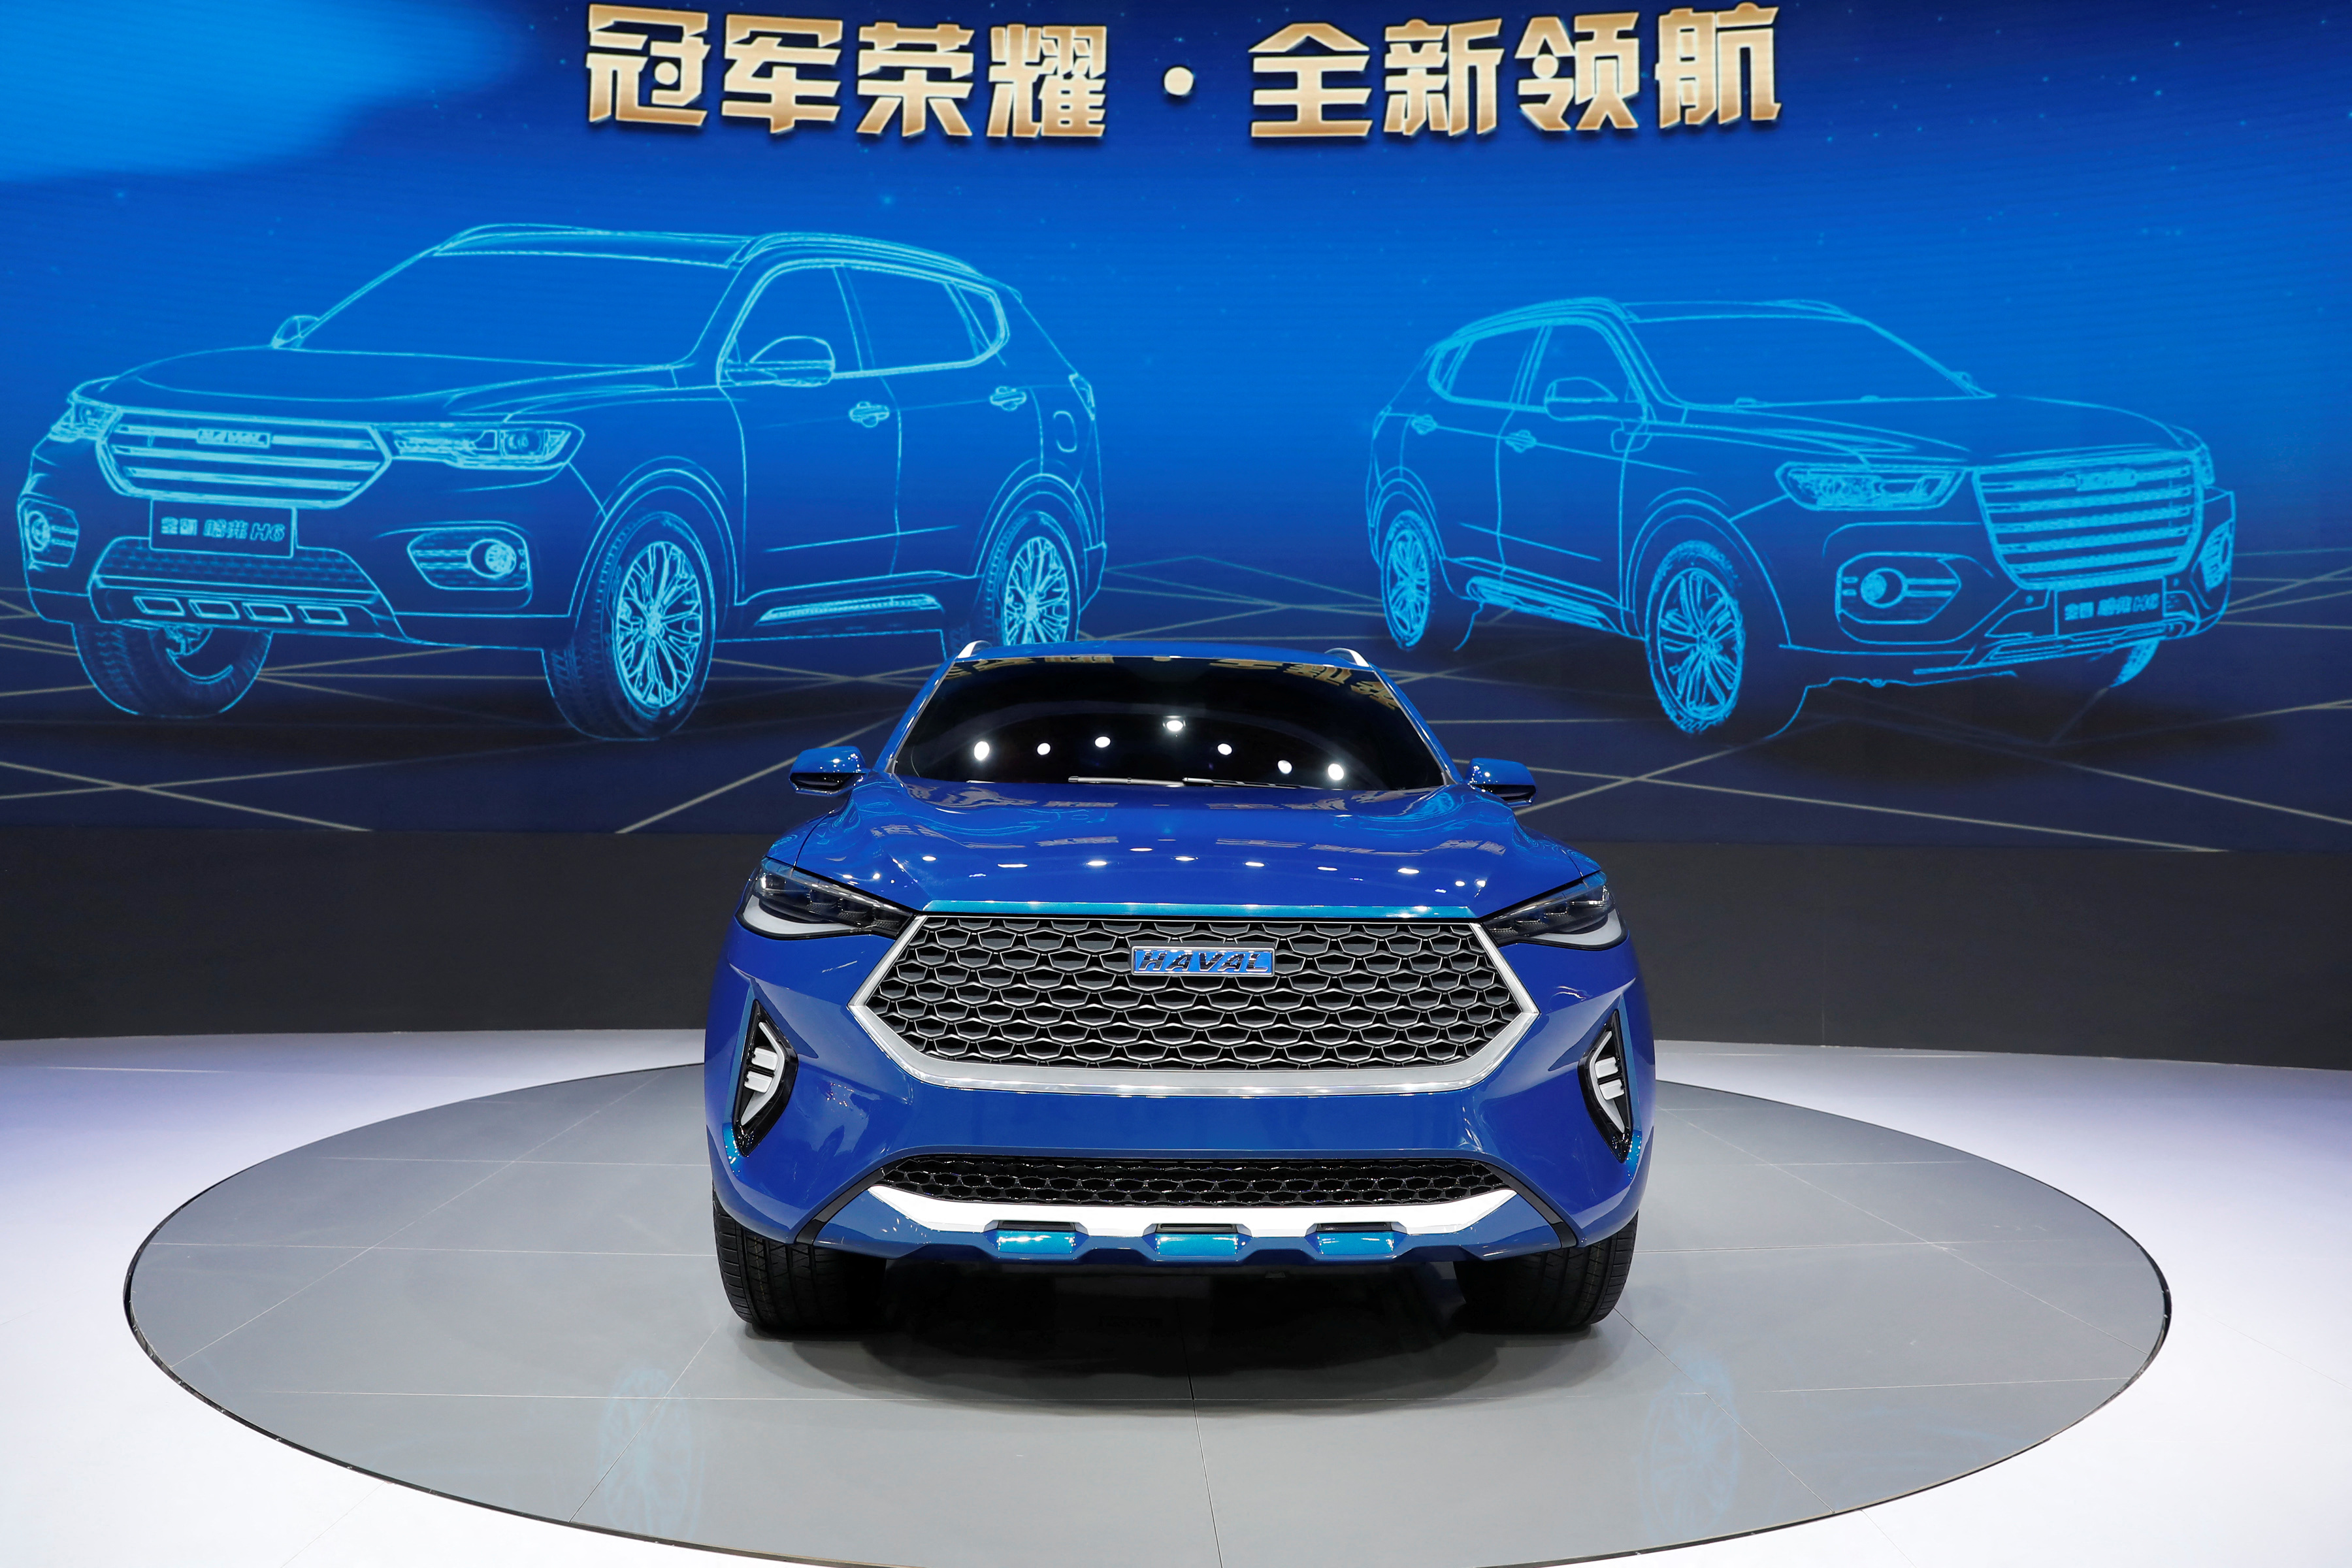 A Haval HB-03 Hybrid car from Great Wall Motors is displayed at Shanghai Auto Show during its media day, in Shanghai